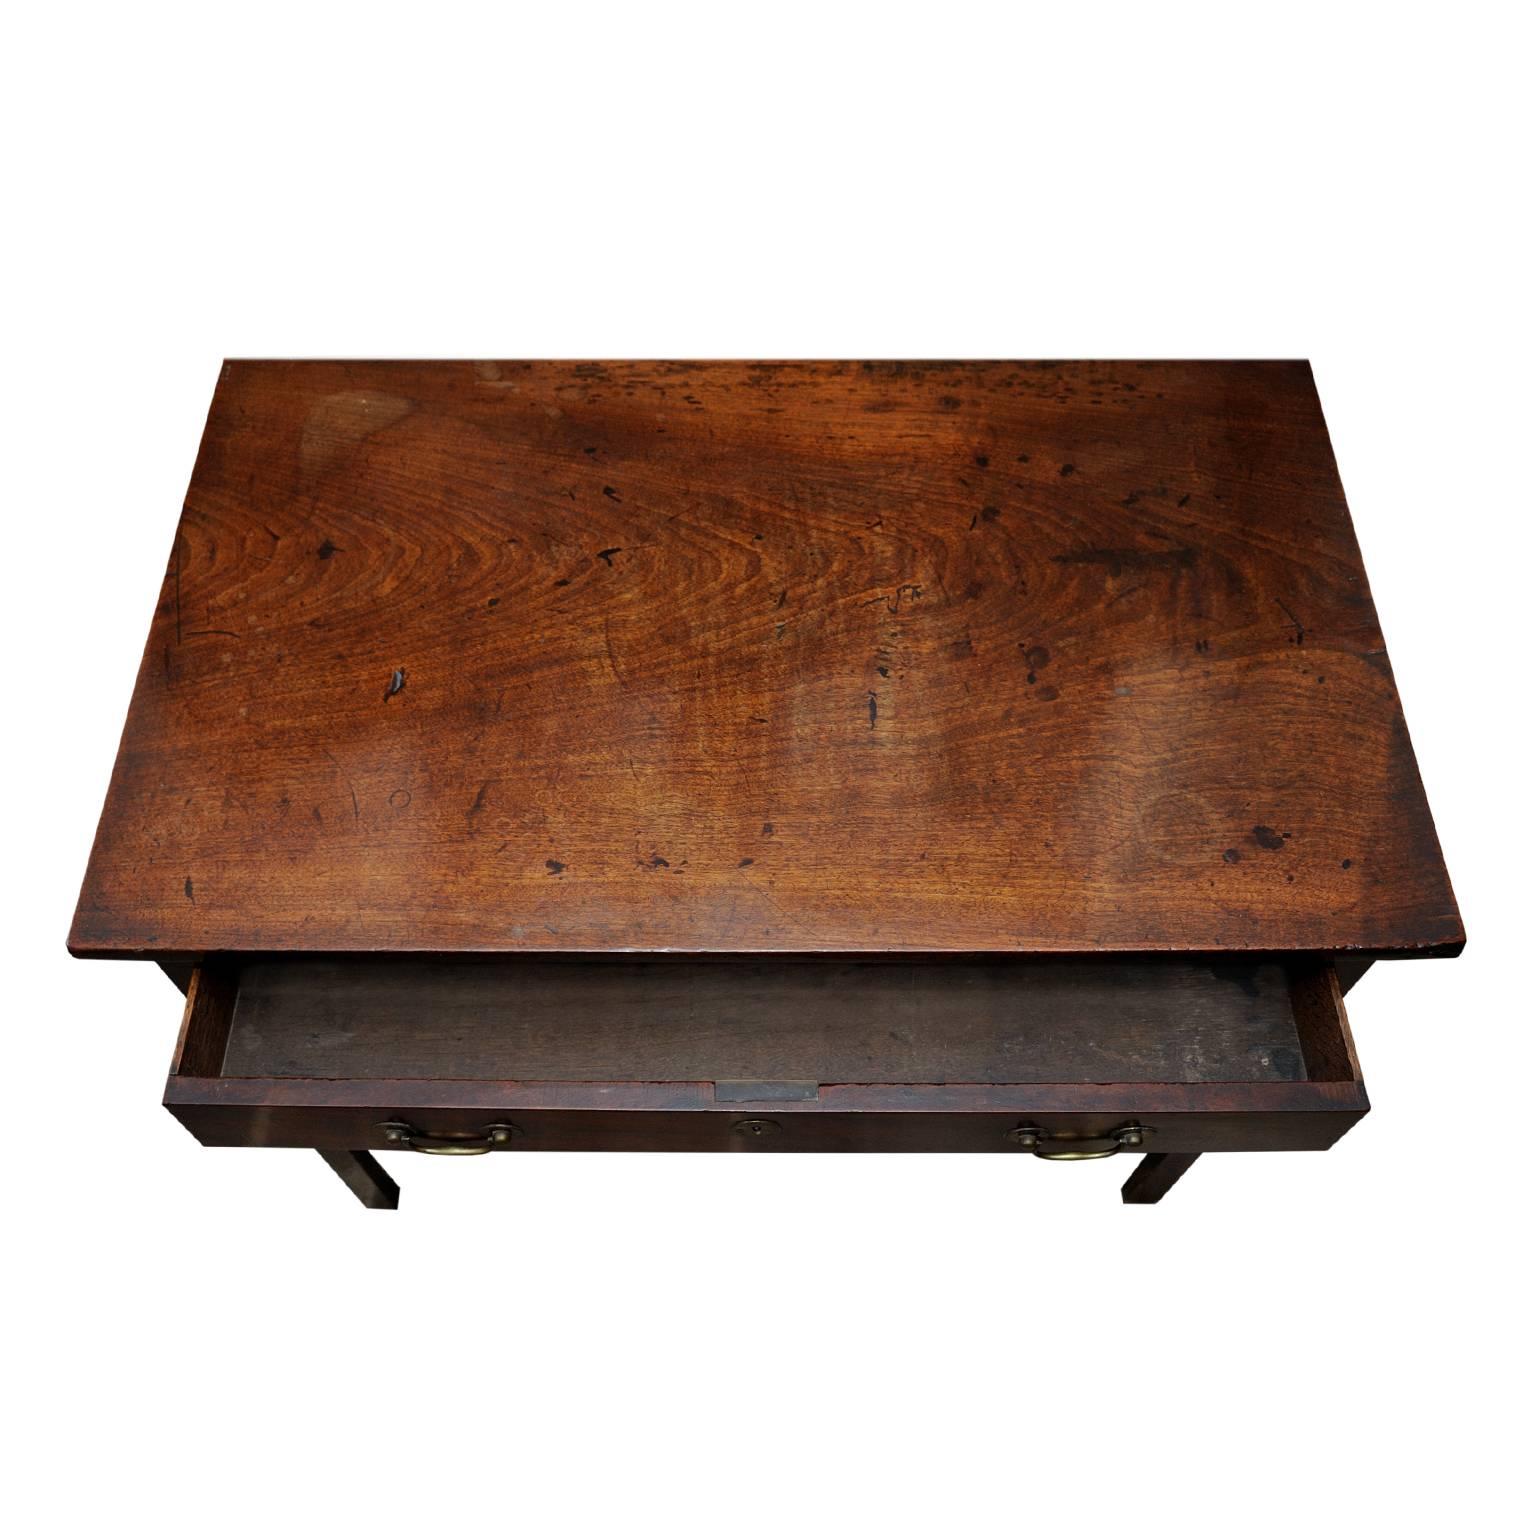 This is a very good, large English George III mahogany mid-18th century Chippendale period side or writing table displaying a lovely colour and offering very usable proportions. This piece retains its original handles, escutcheons and lock, circa